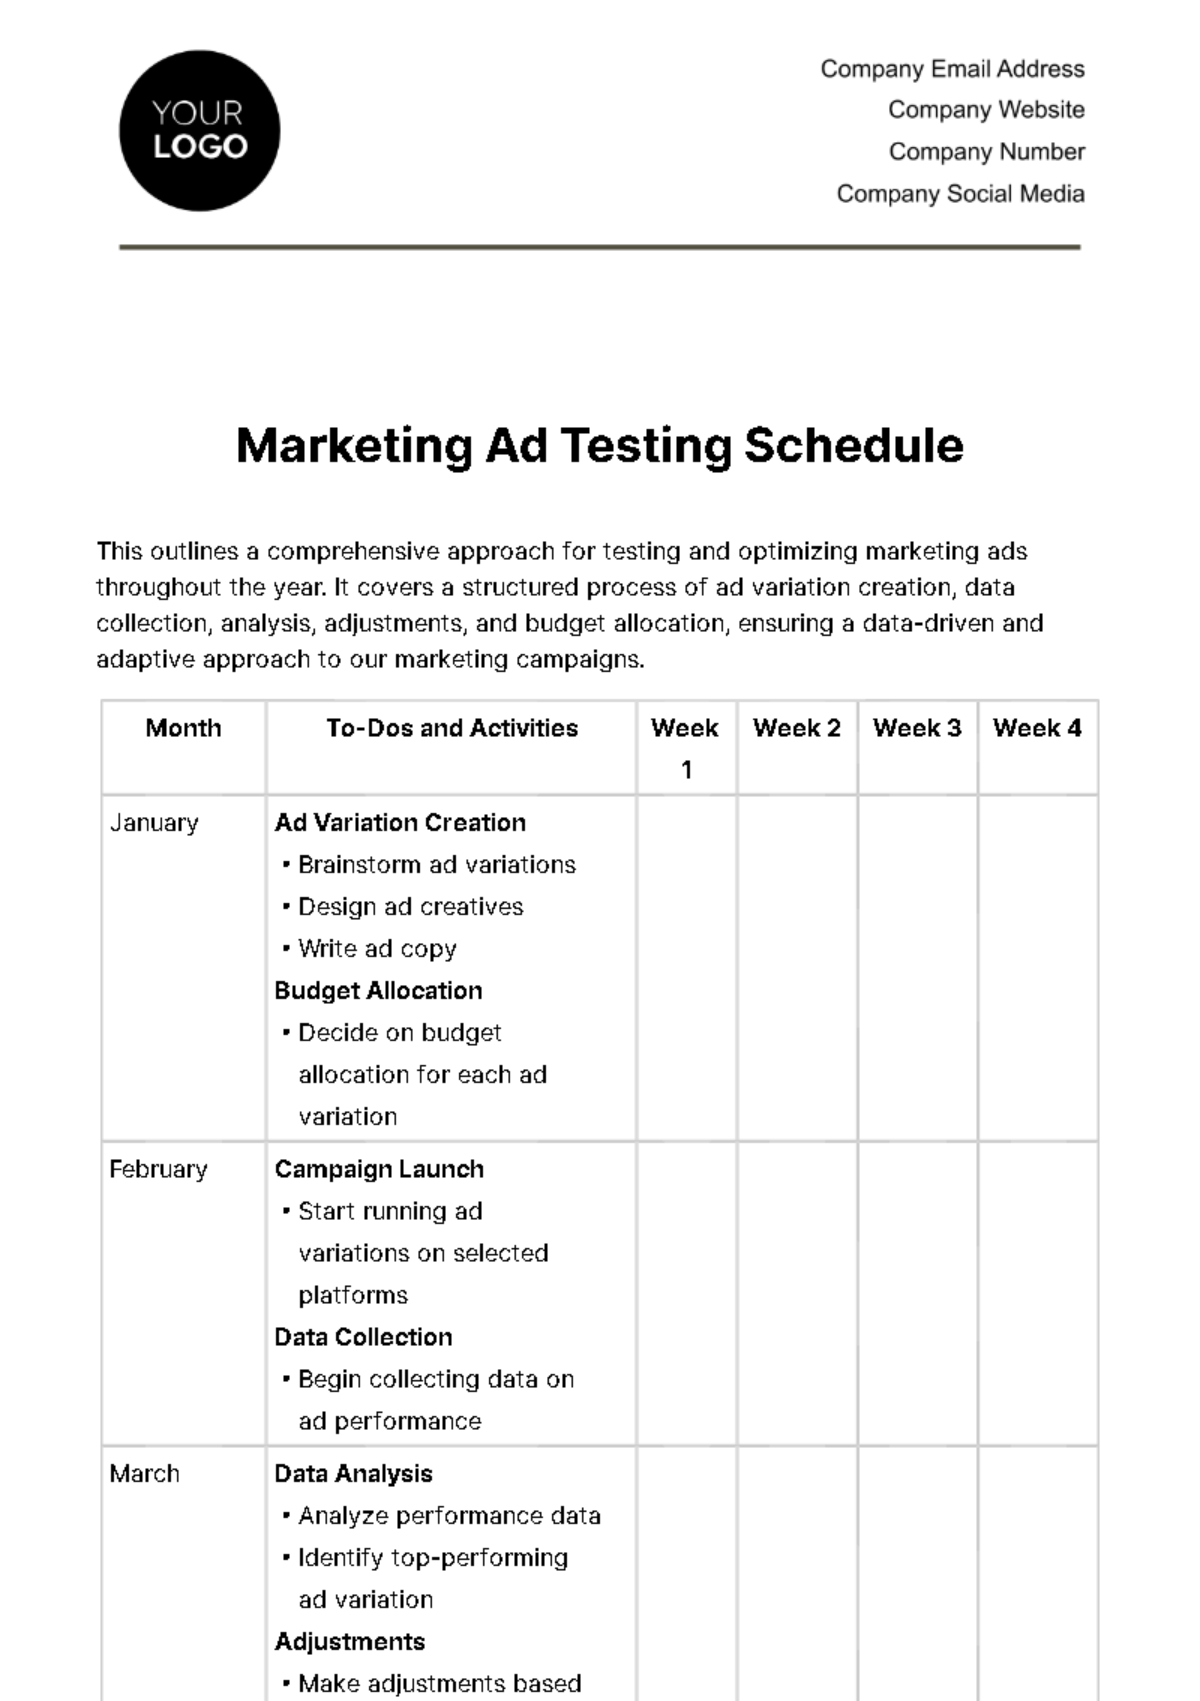 Free Marketing Ad Testing Schedule Template